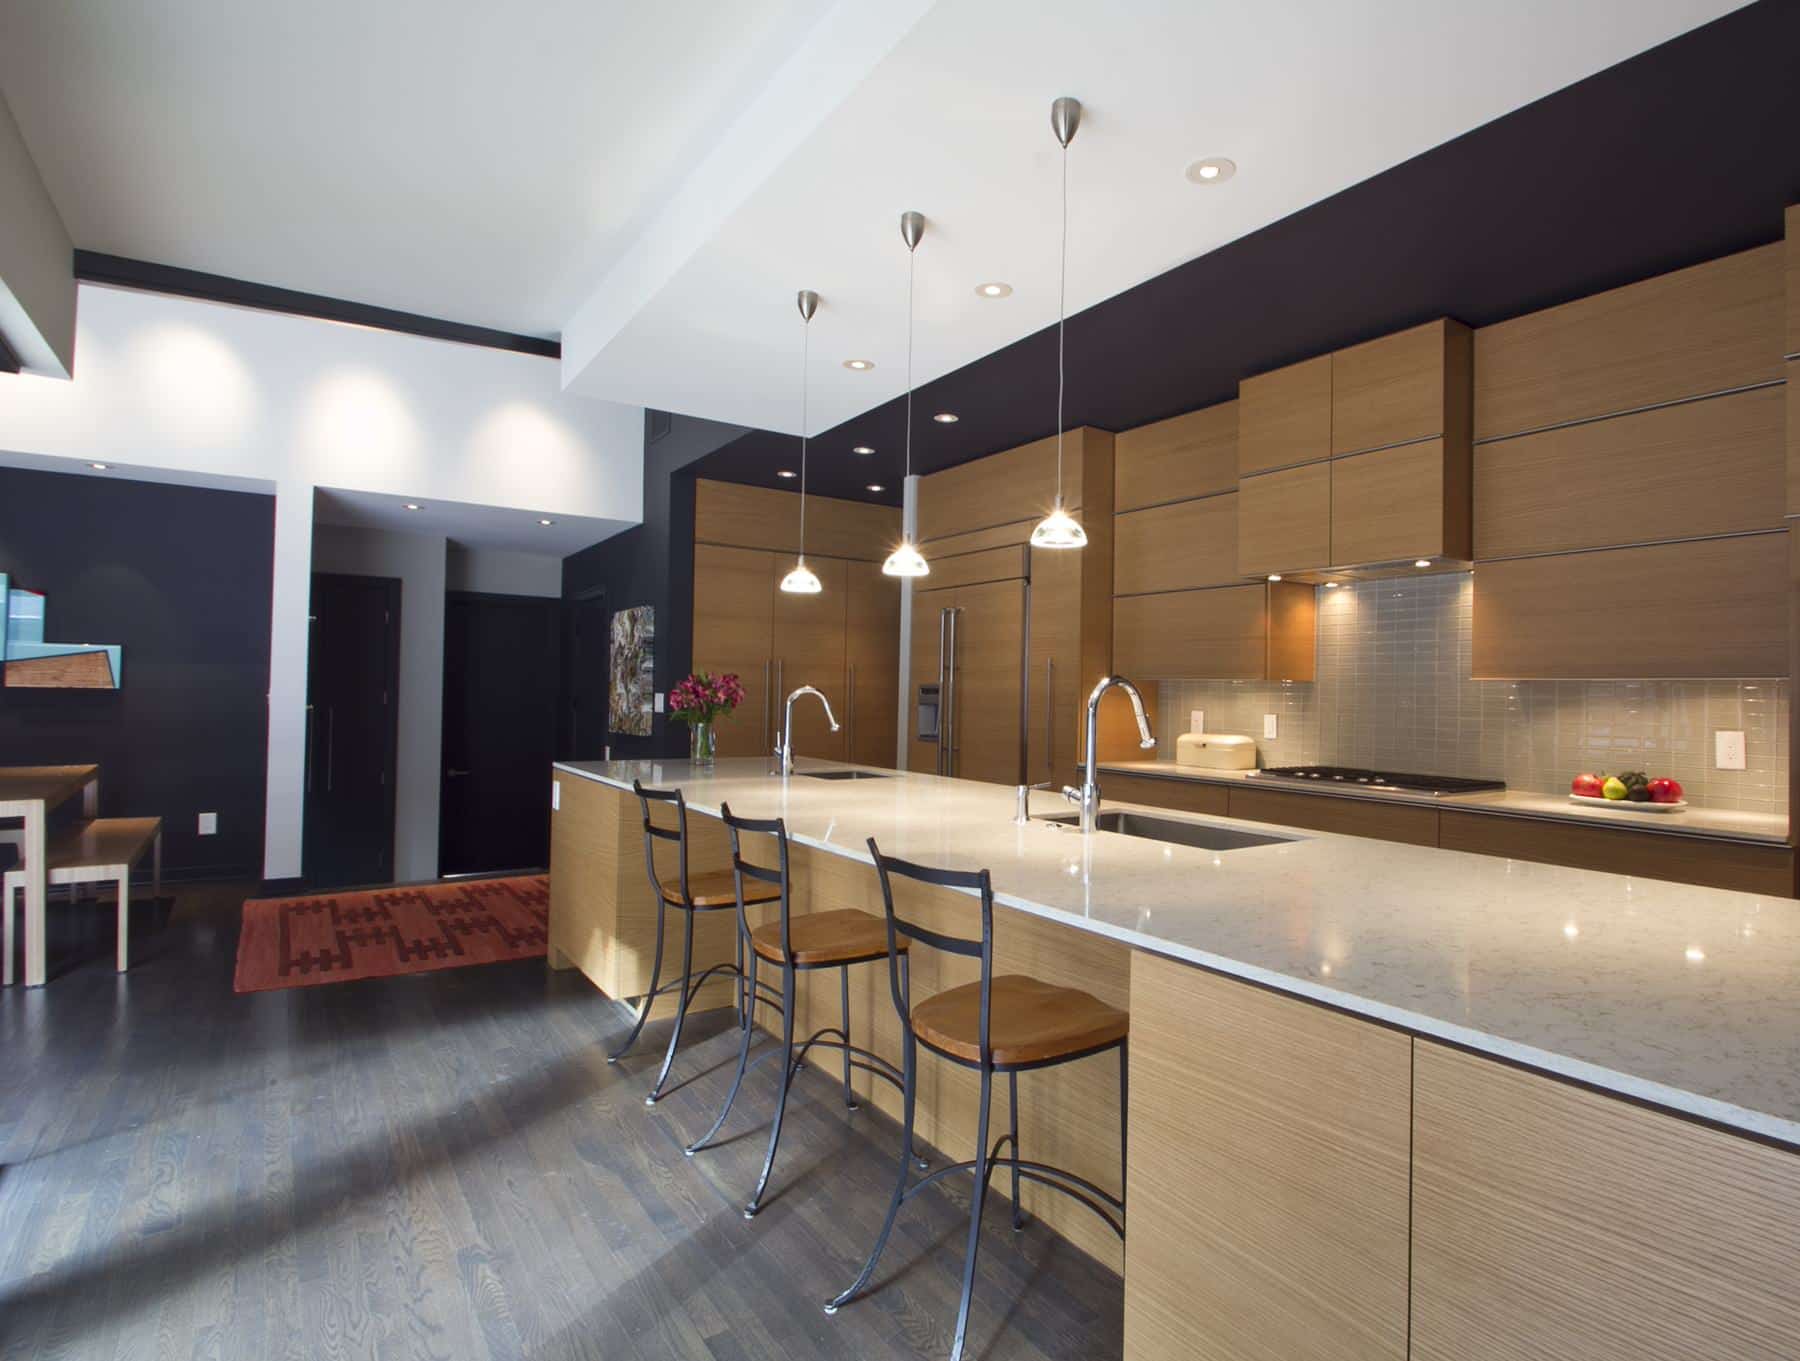 Why should you have modern kitchen cabinets installed?